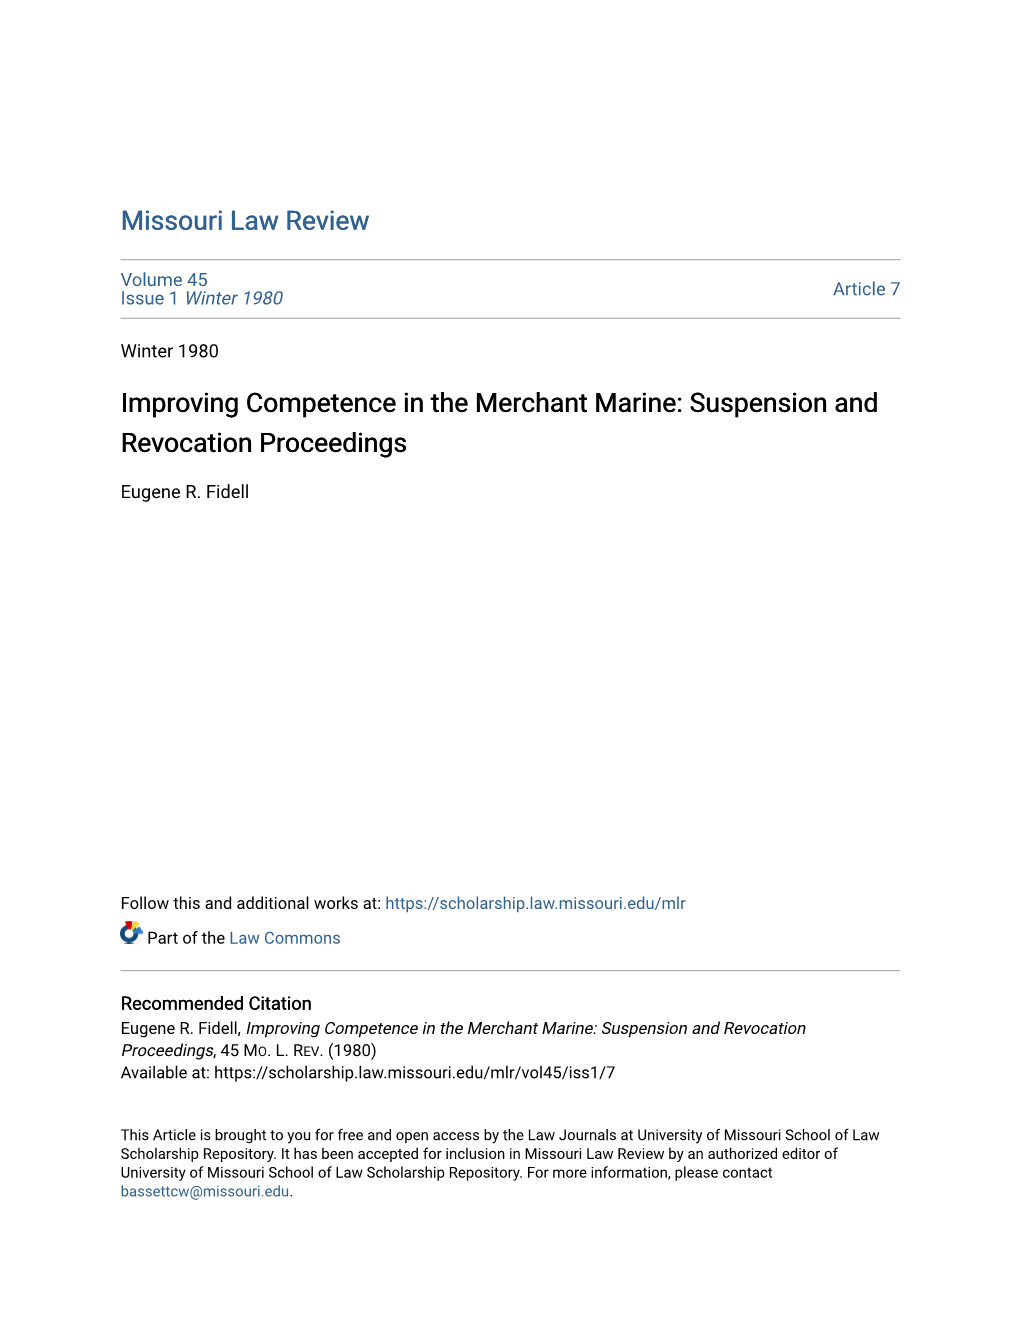 Improving Competence in the Merchant Marine: Suspension and Revocation Proceedings